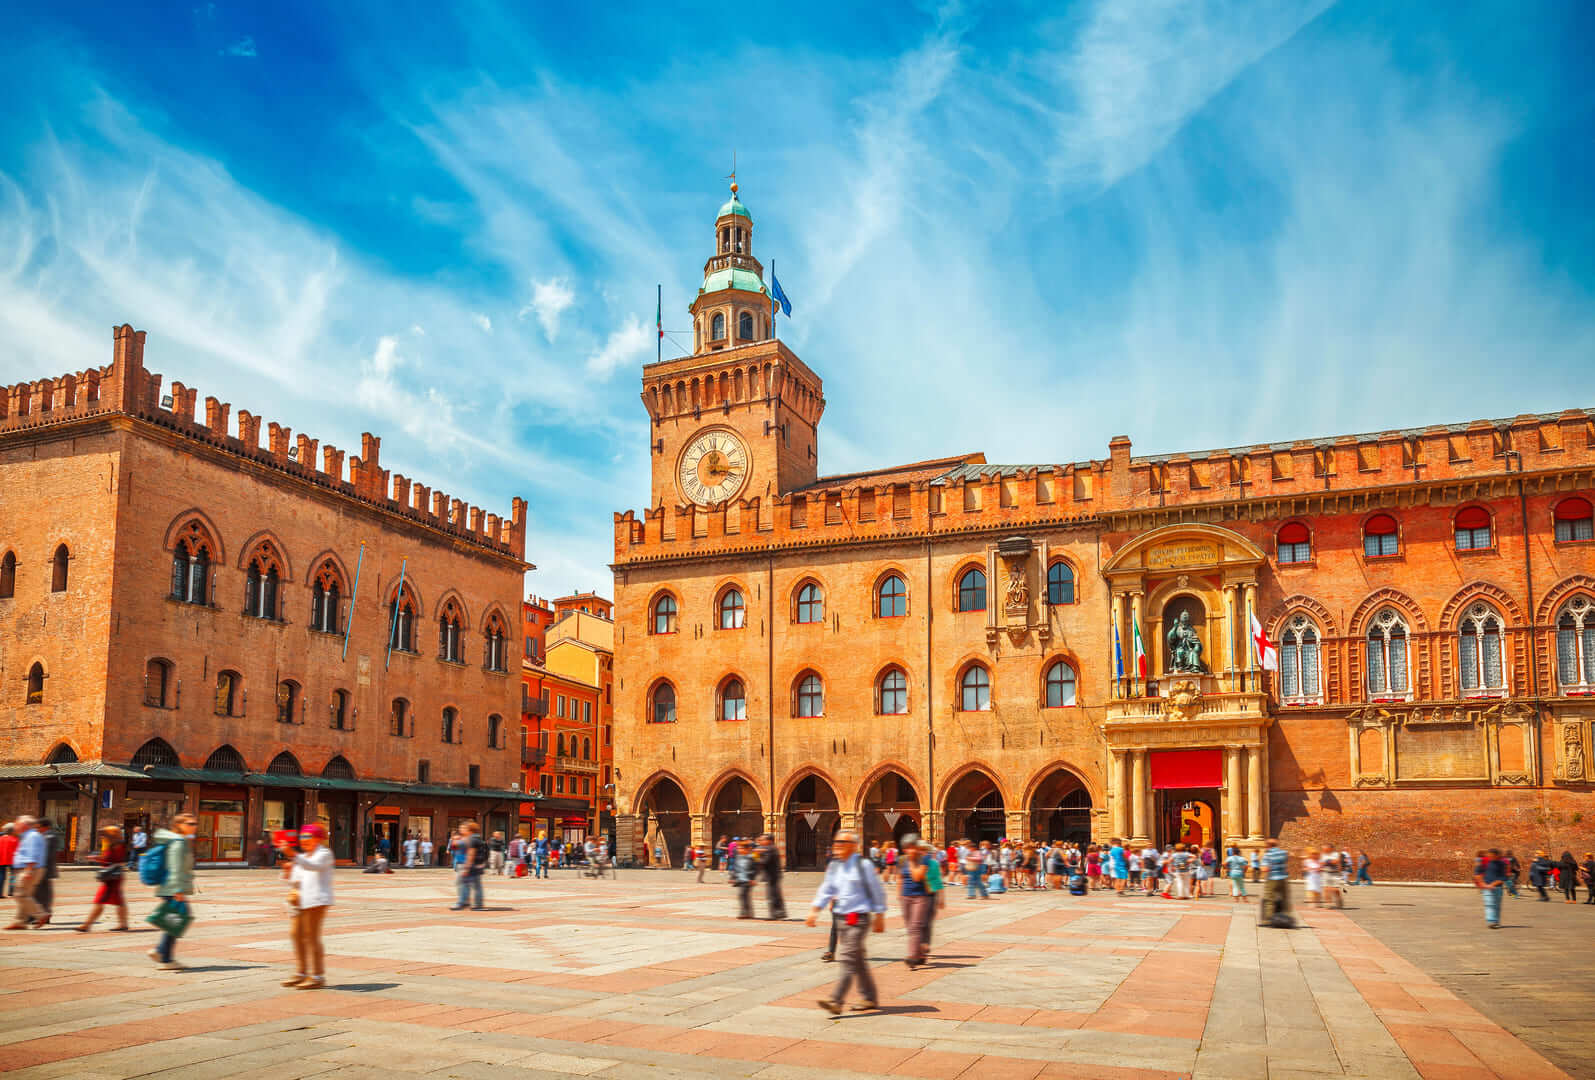 Italy Piazza Maggiore in Bologna old town tower of hall with big clock and blue sky on background. Antique buildings terracotta galleries
